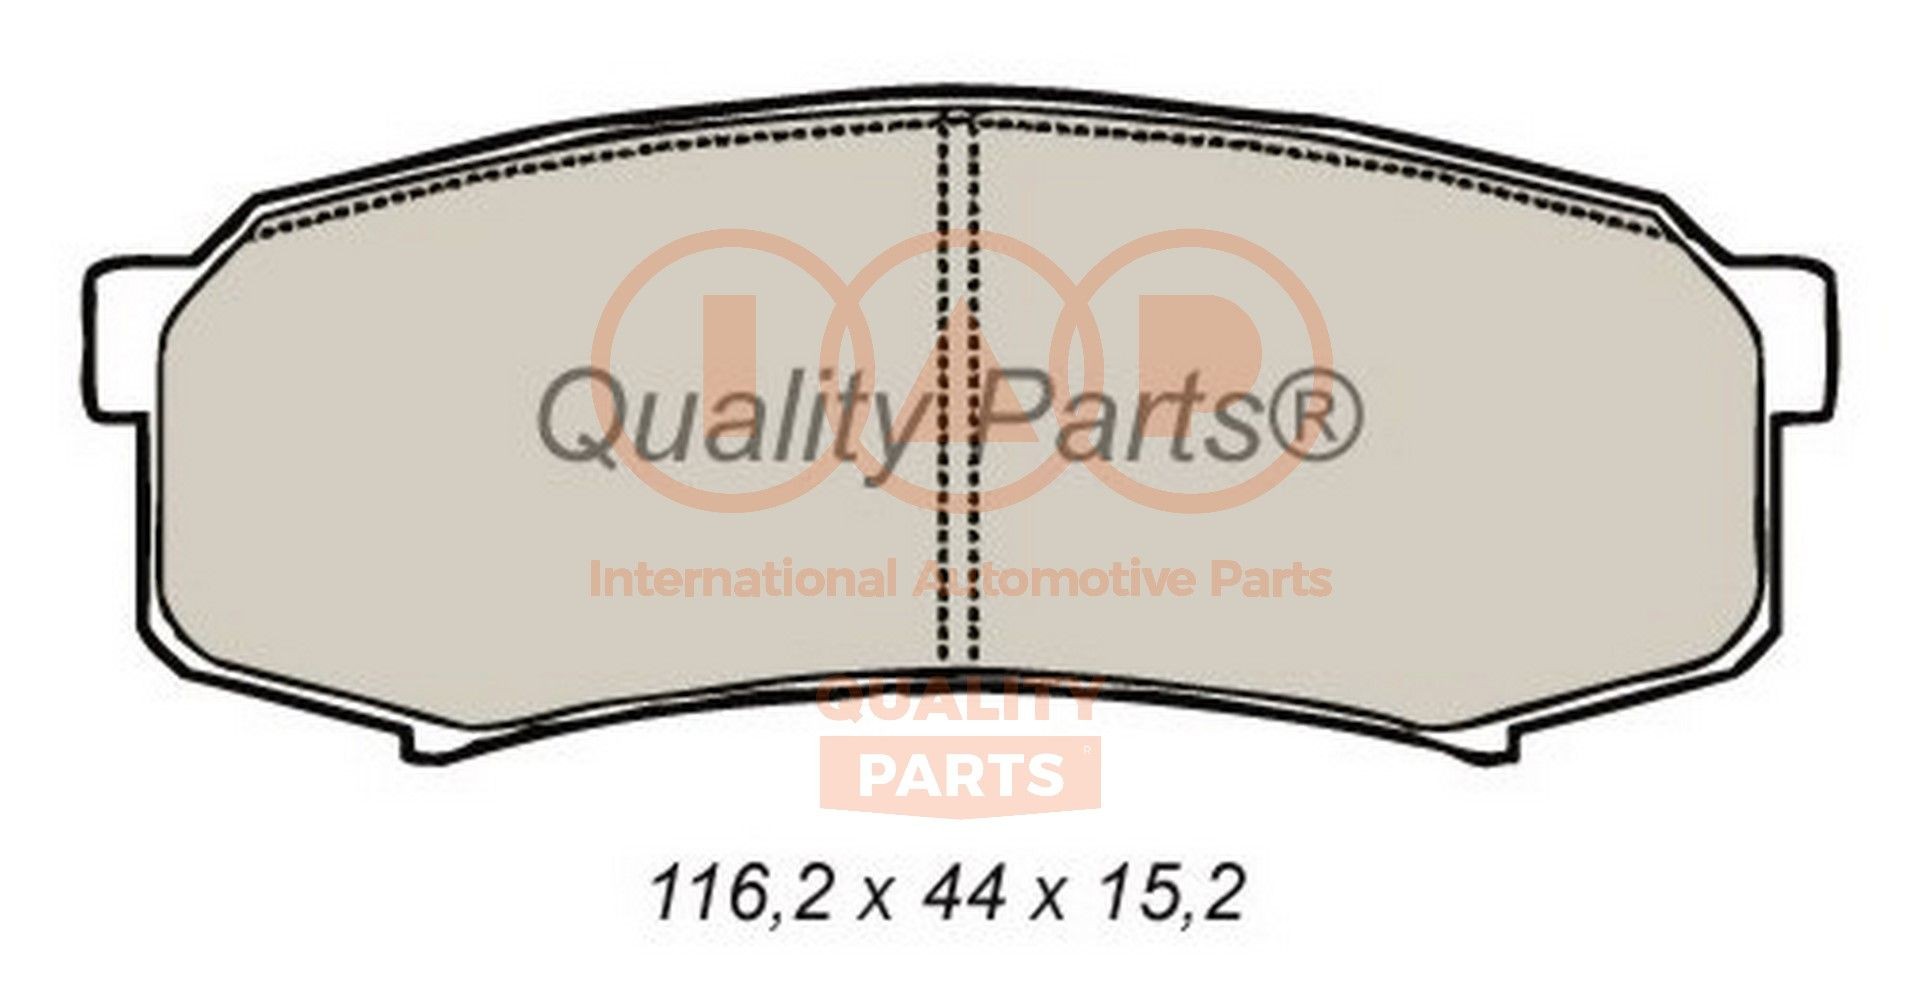 IAP QUALITY PARTS Rear Axle Height 1: 44mm, Width 1: 116,2mm, Thickness 1: 15,2mm Brake pads 704-17047P buy